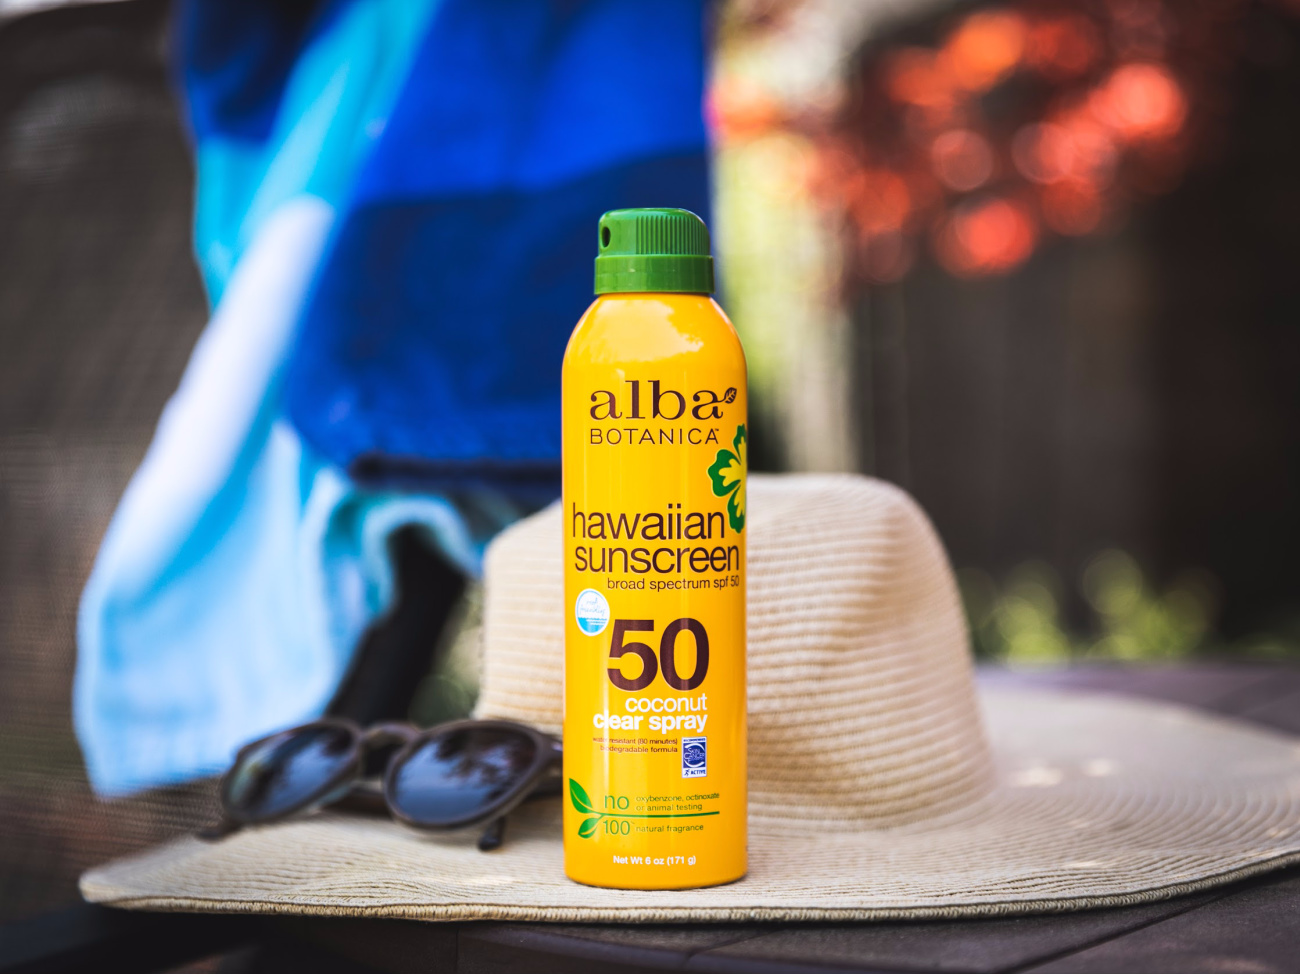 Big Savings On Alba Botanica Sunscreen Products Available Now At Publix